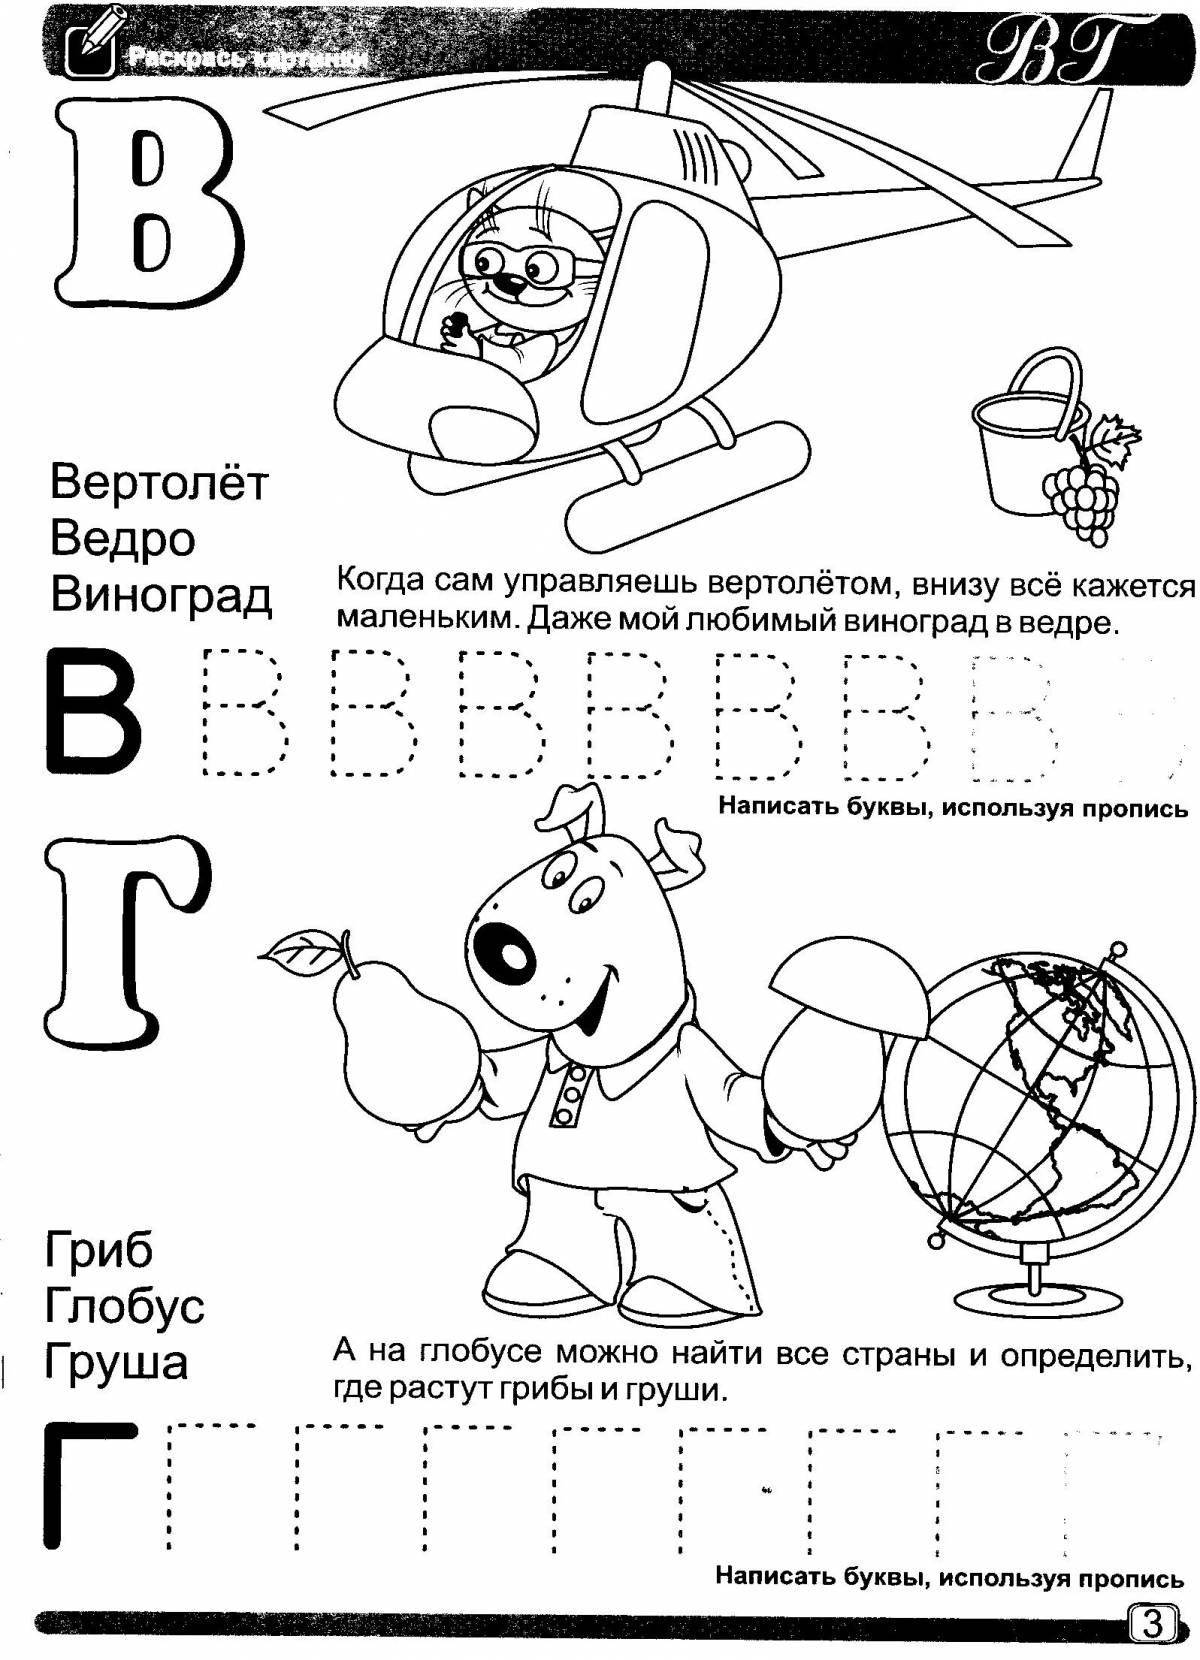 Colourful alphabet coloring for children 5-6 years old